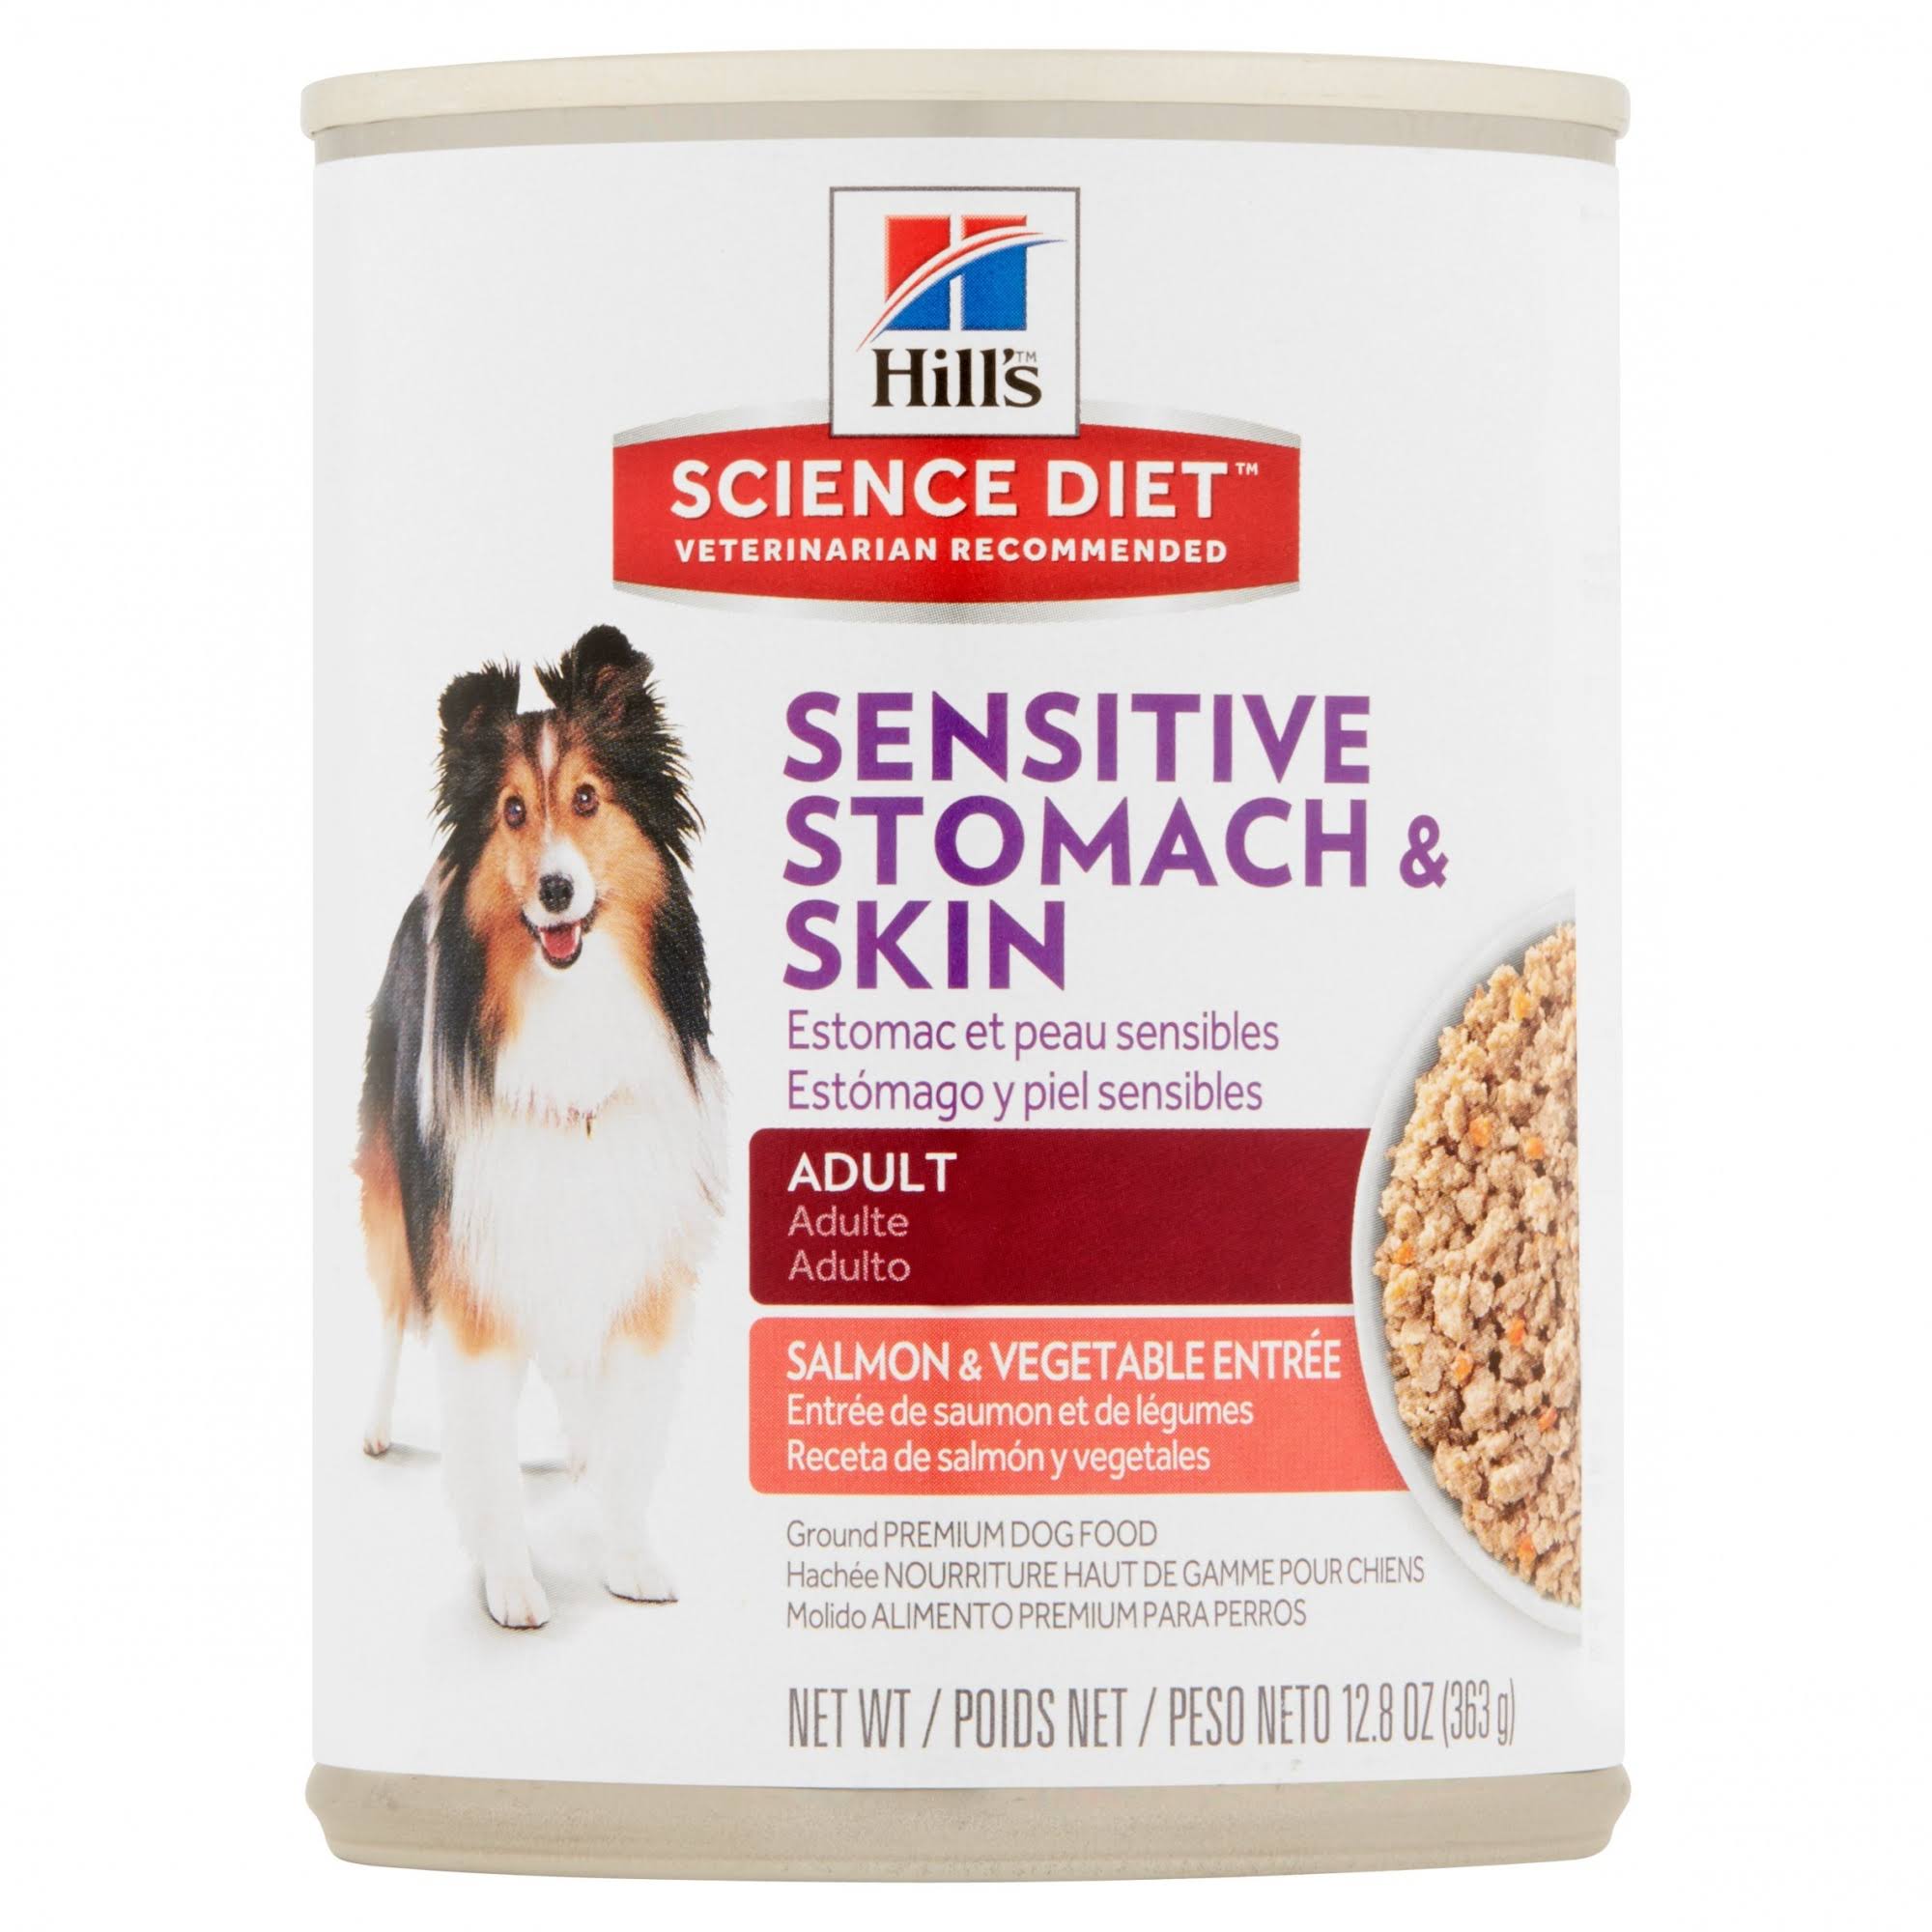 Hill's Science Diet Sensitive Stomach and Skin Premium Dog Food Adult - Salmon and Vegetable Entrée, 12.8oz